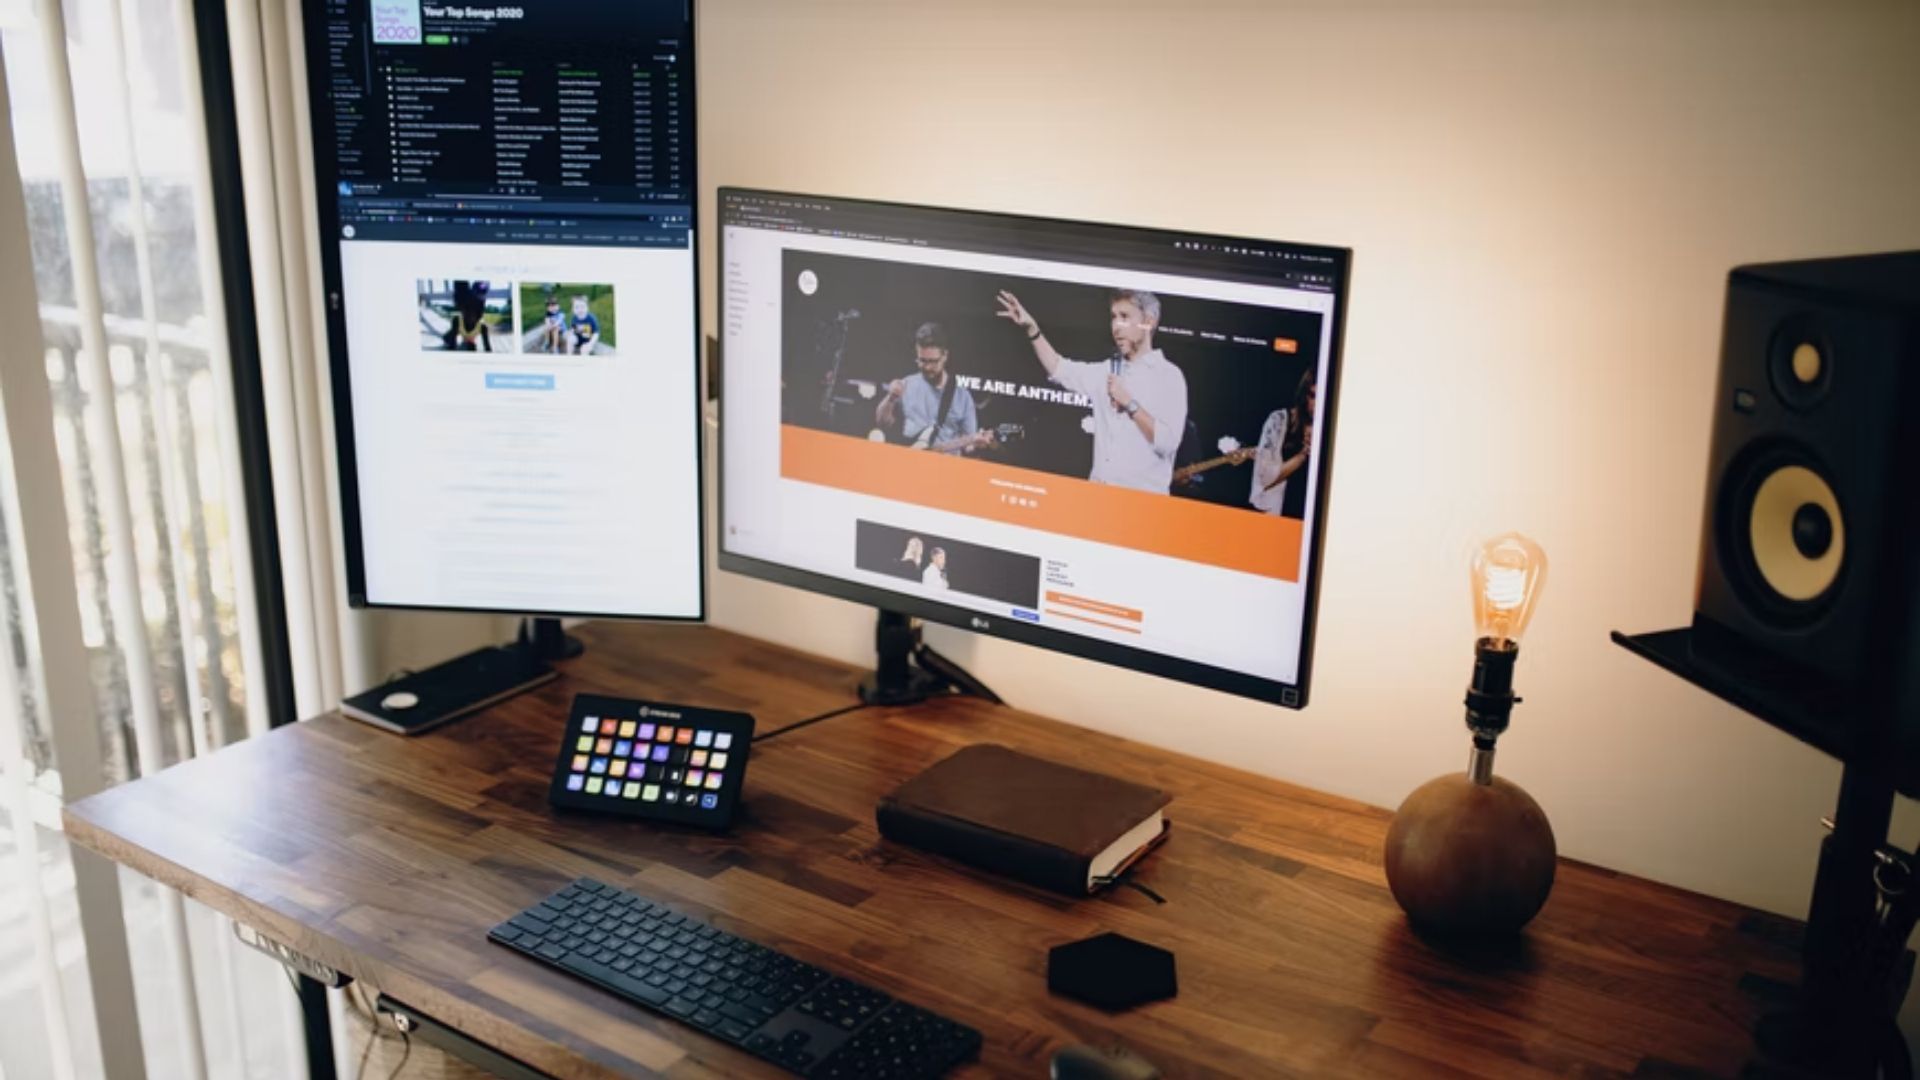 vertical monitor set up on a wooden desk next to a horizontal monitor